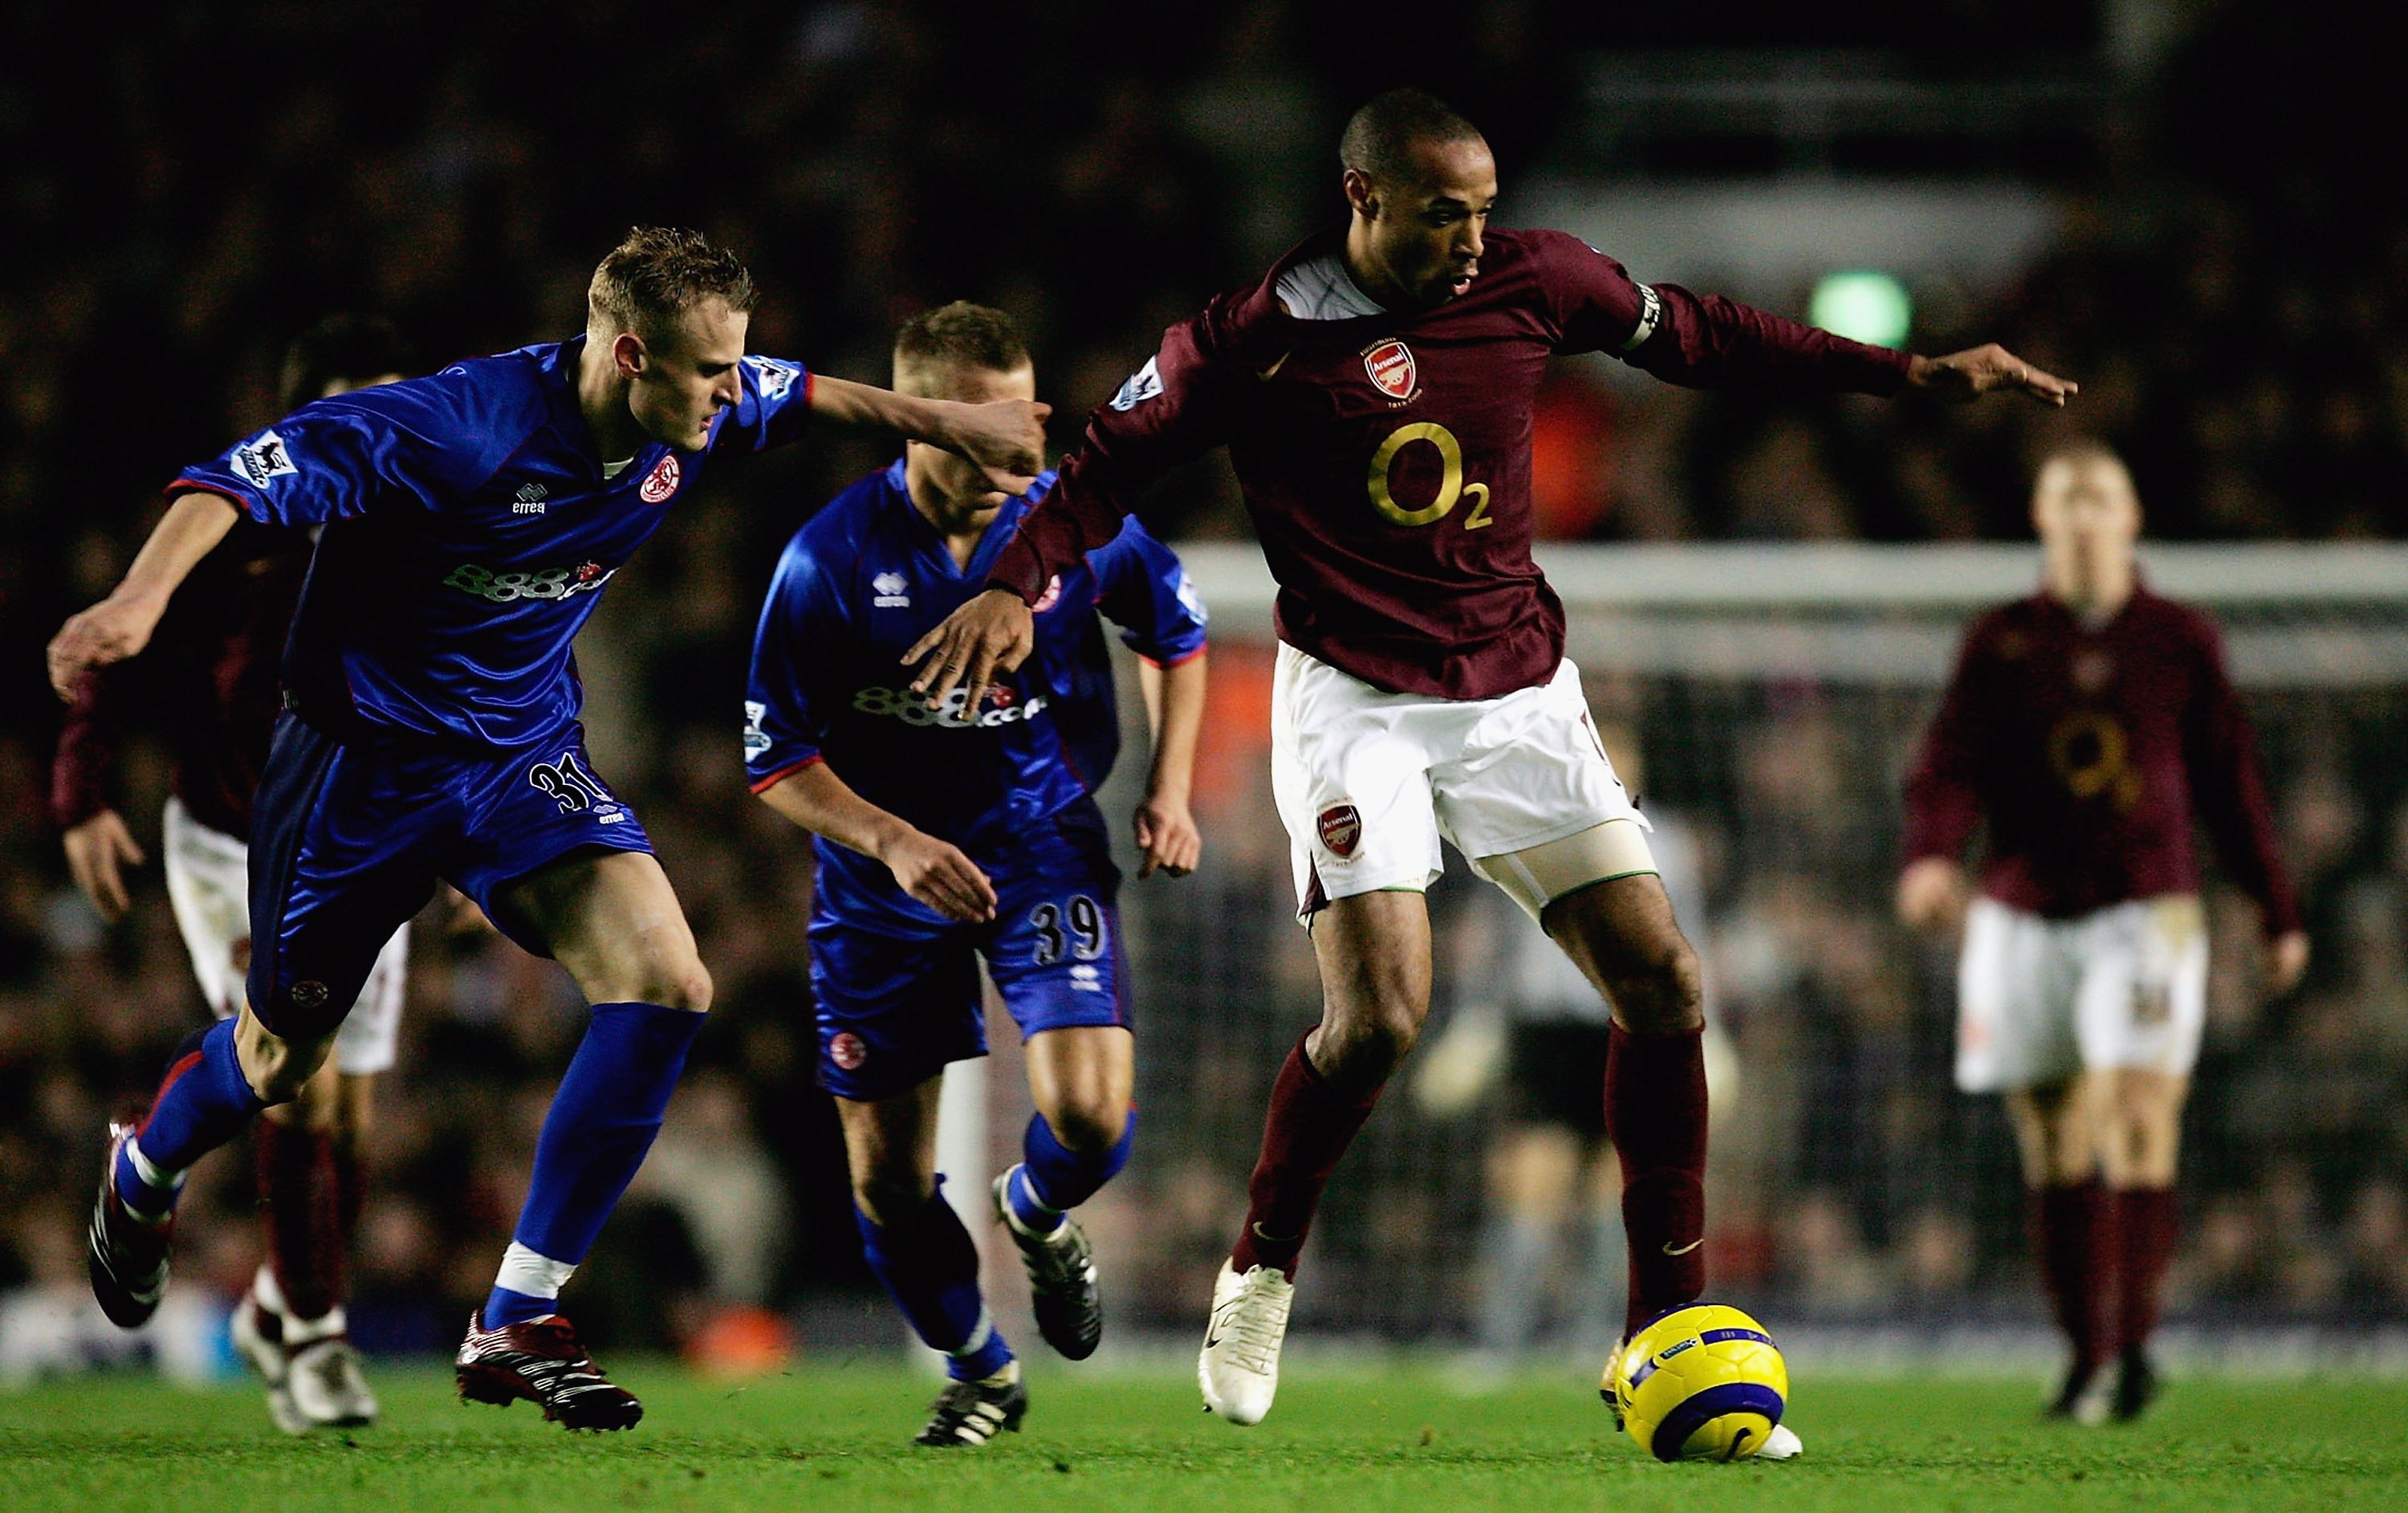 LONDON - JANUARY 14:  Thierry Henry of Arsenal gets away from David Wheater of Middlesbrough during the Barclays Premiership match between Arsenal and Middlesbrough at Highbury on January 14, 2006 in London, England.  (Photo by Richard Heathcote/Getty Ima